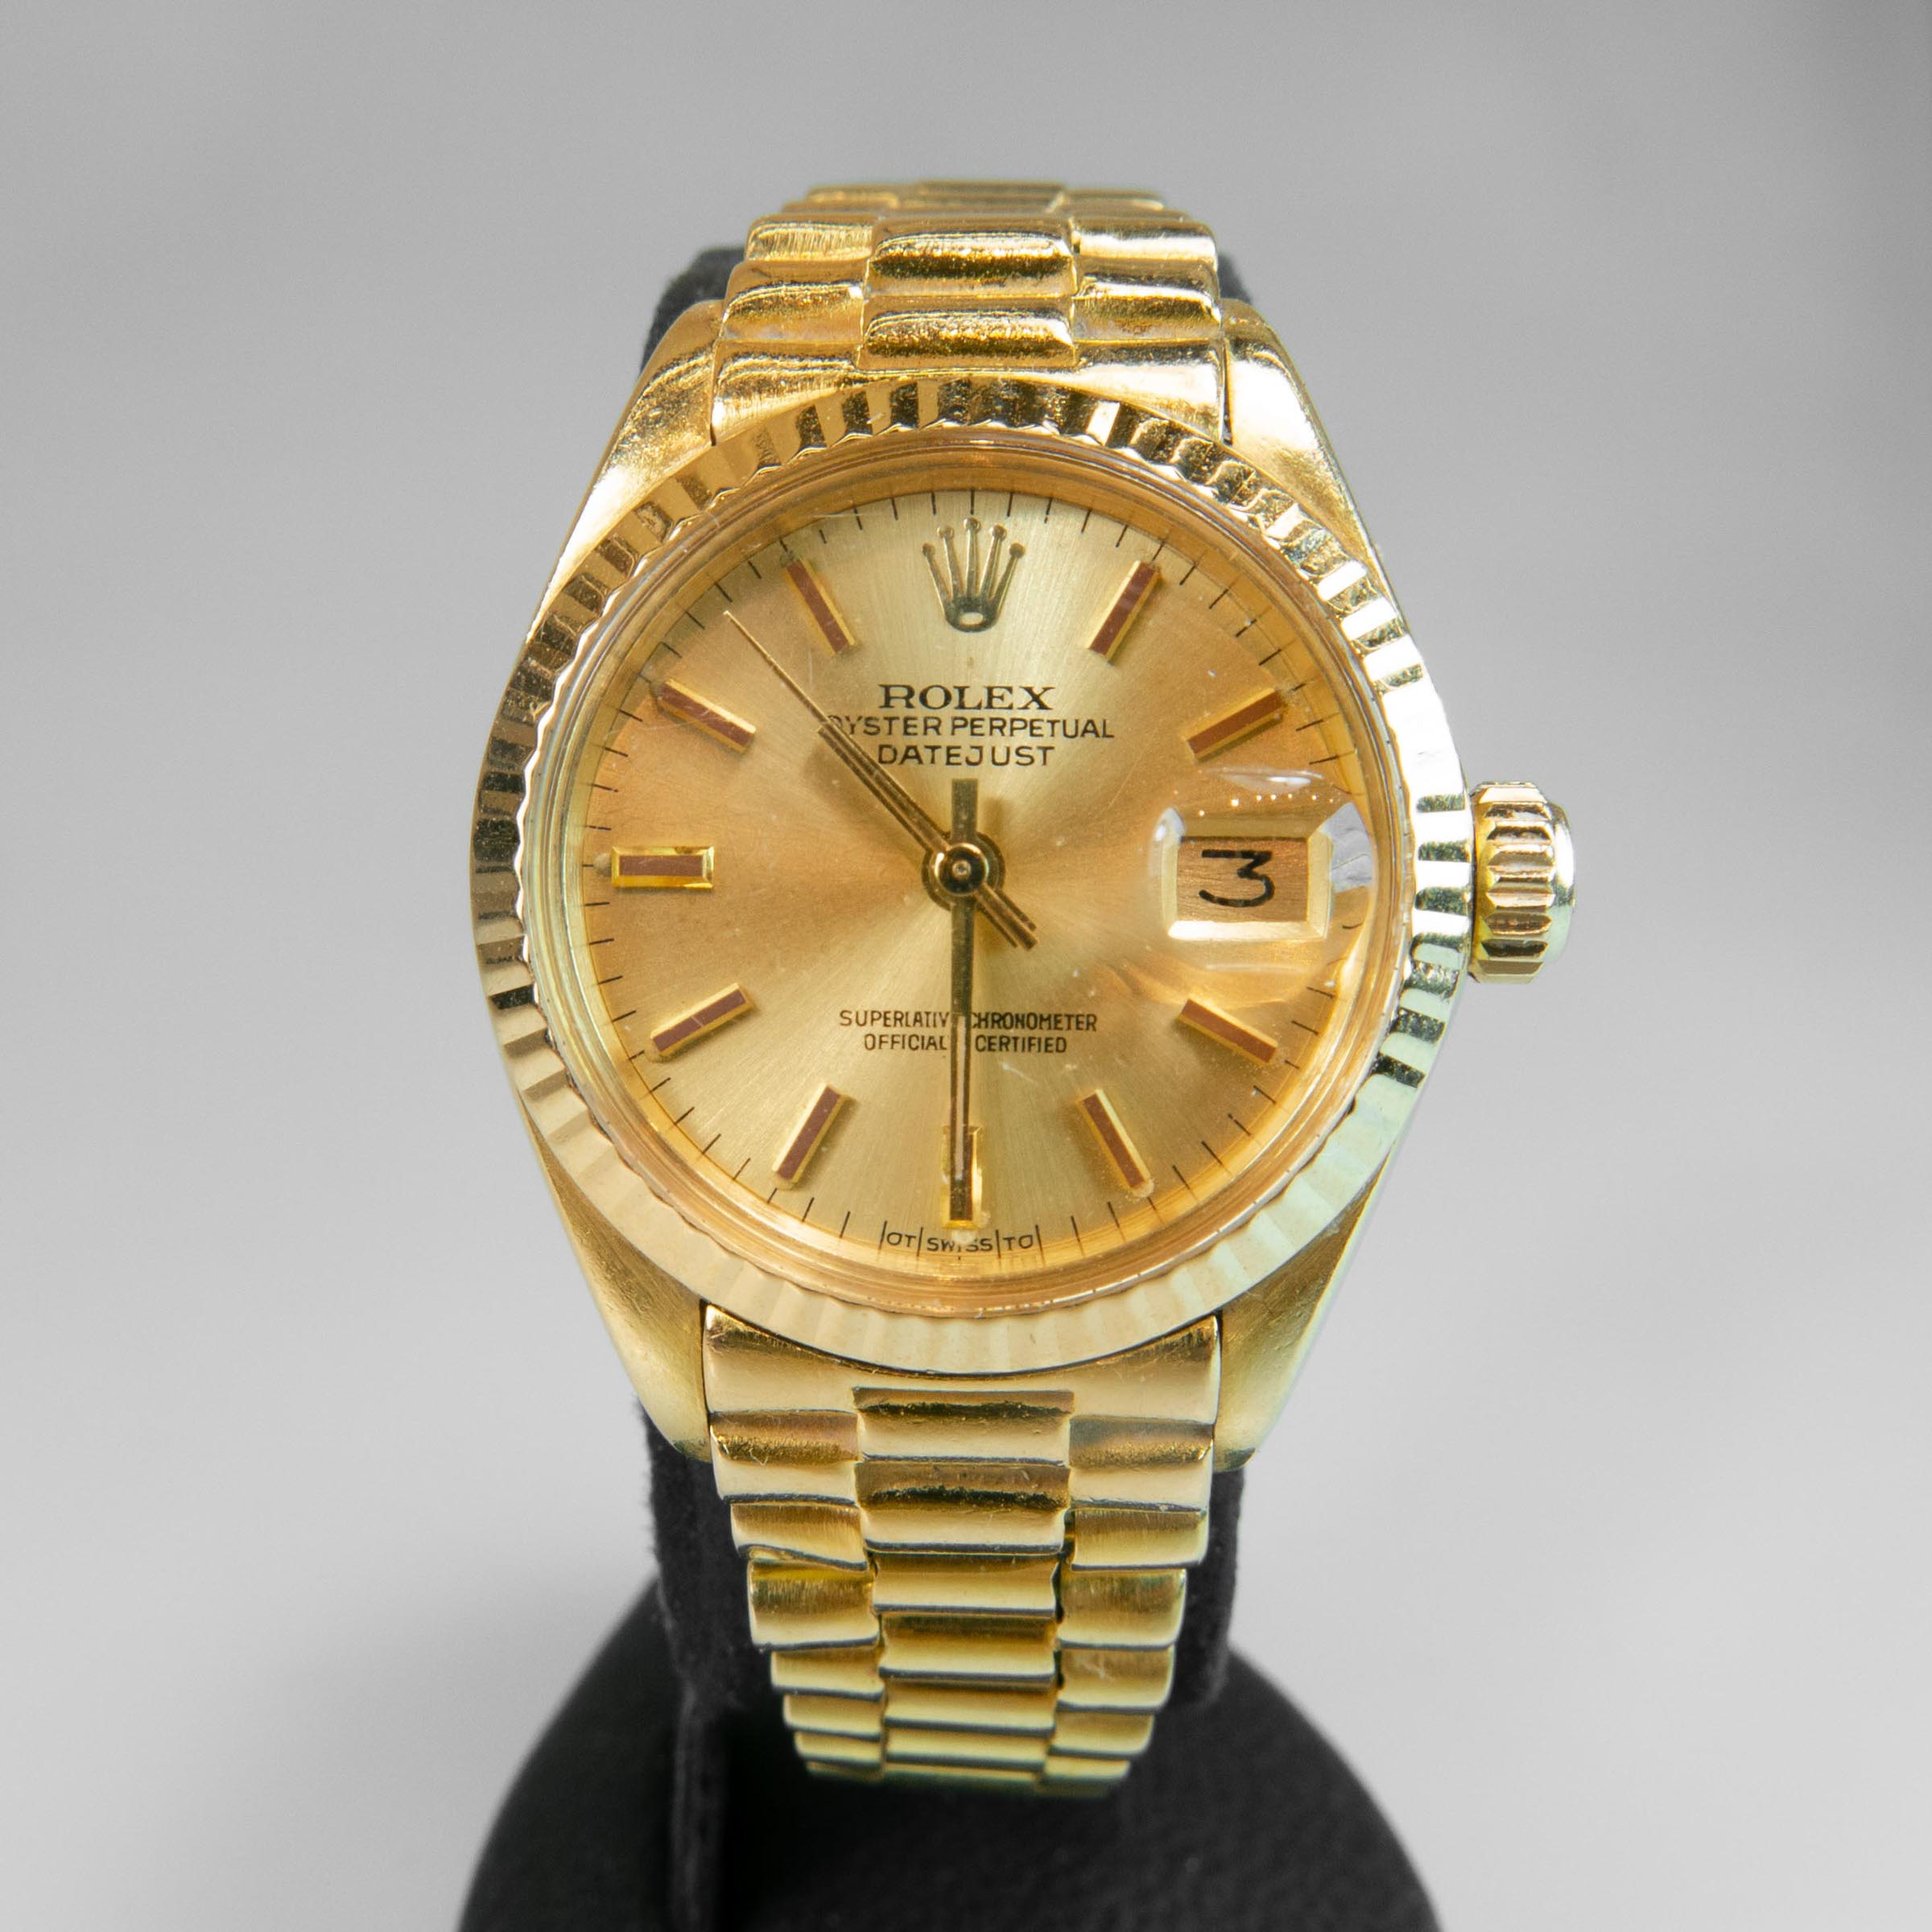 Lady's Rolex Oyster Perpetual Datejust Wristwatch